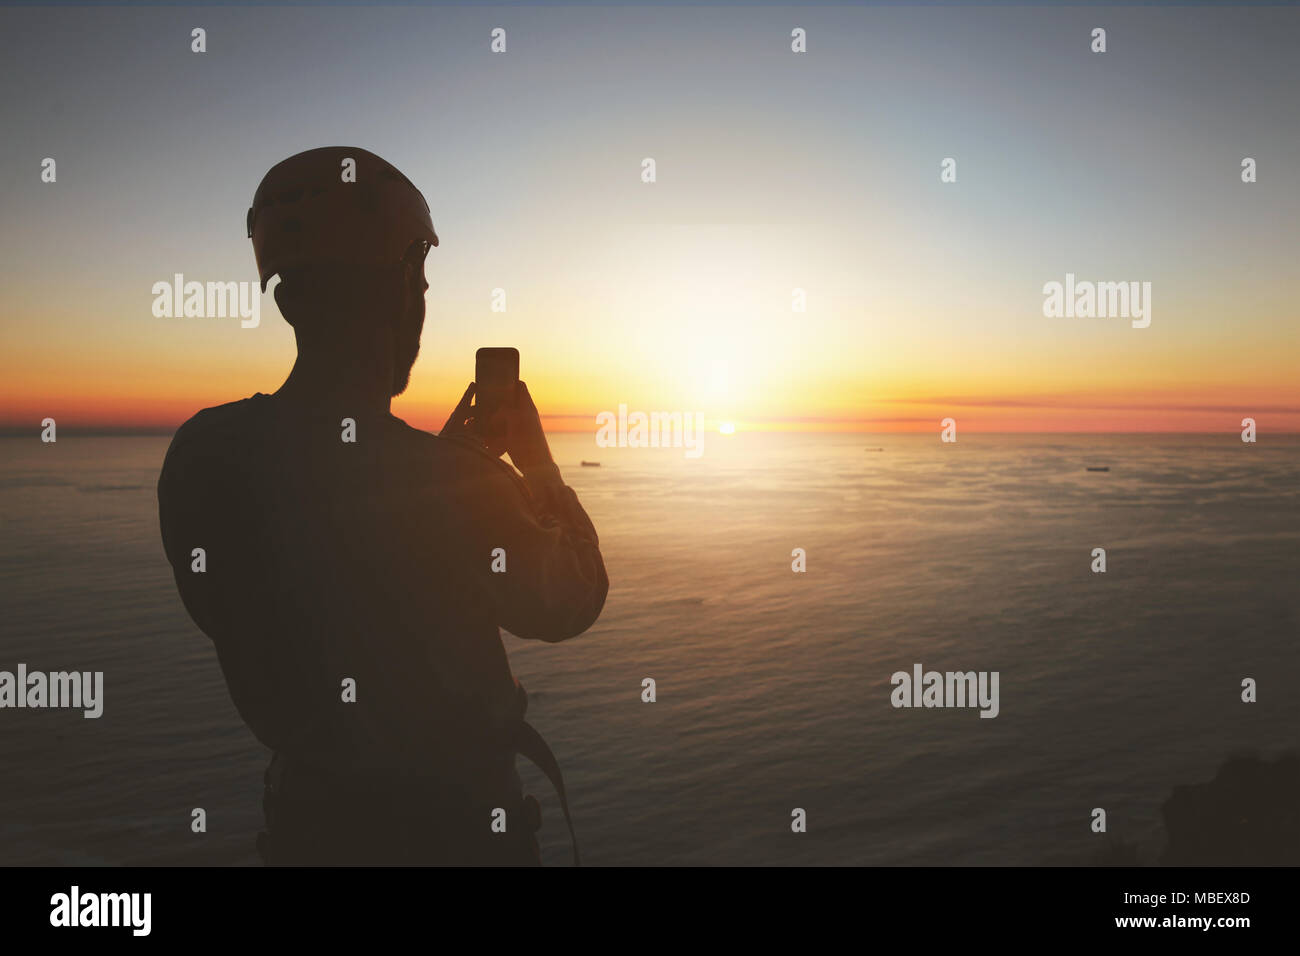 Silhouette rock climber with camera phone photographing tranquil sunset over ocean Stock Photo